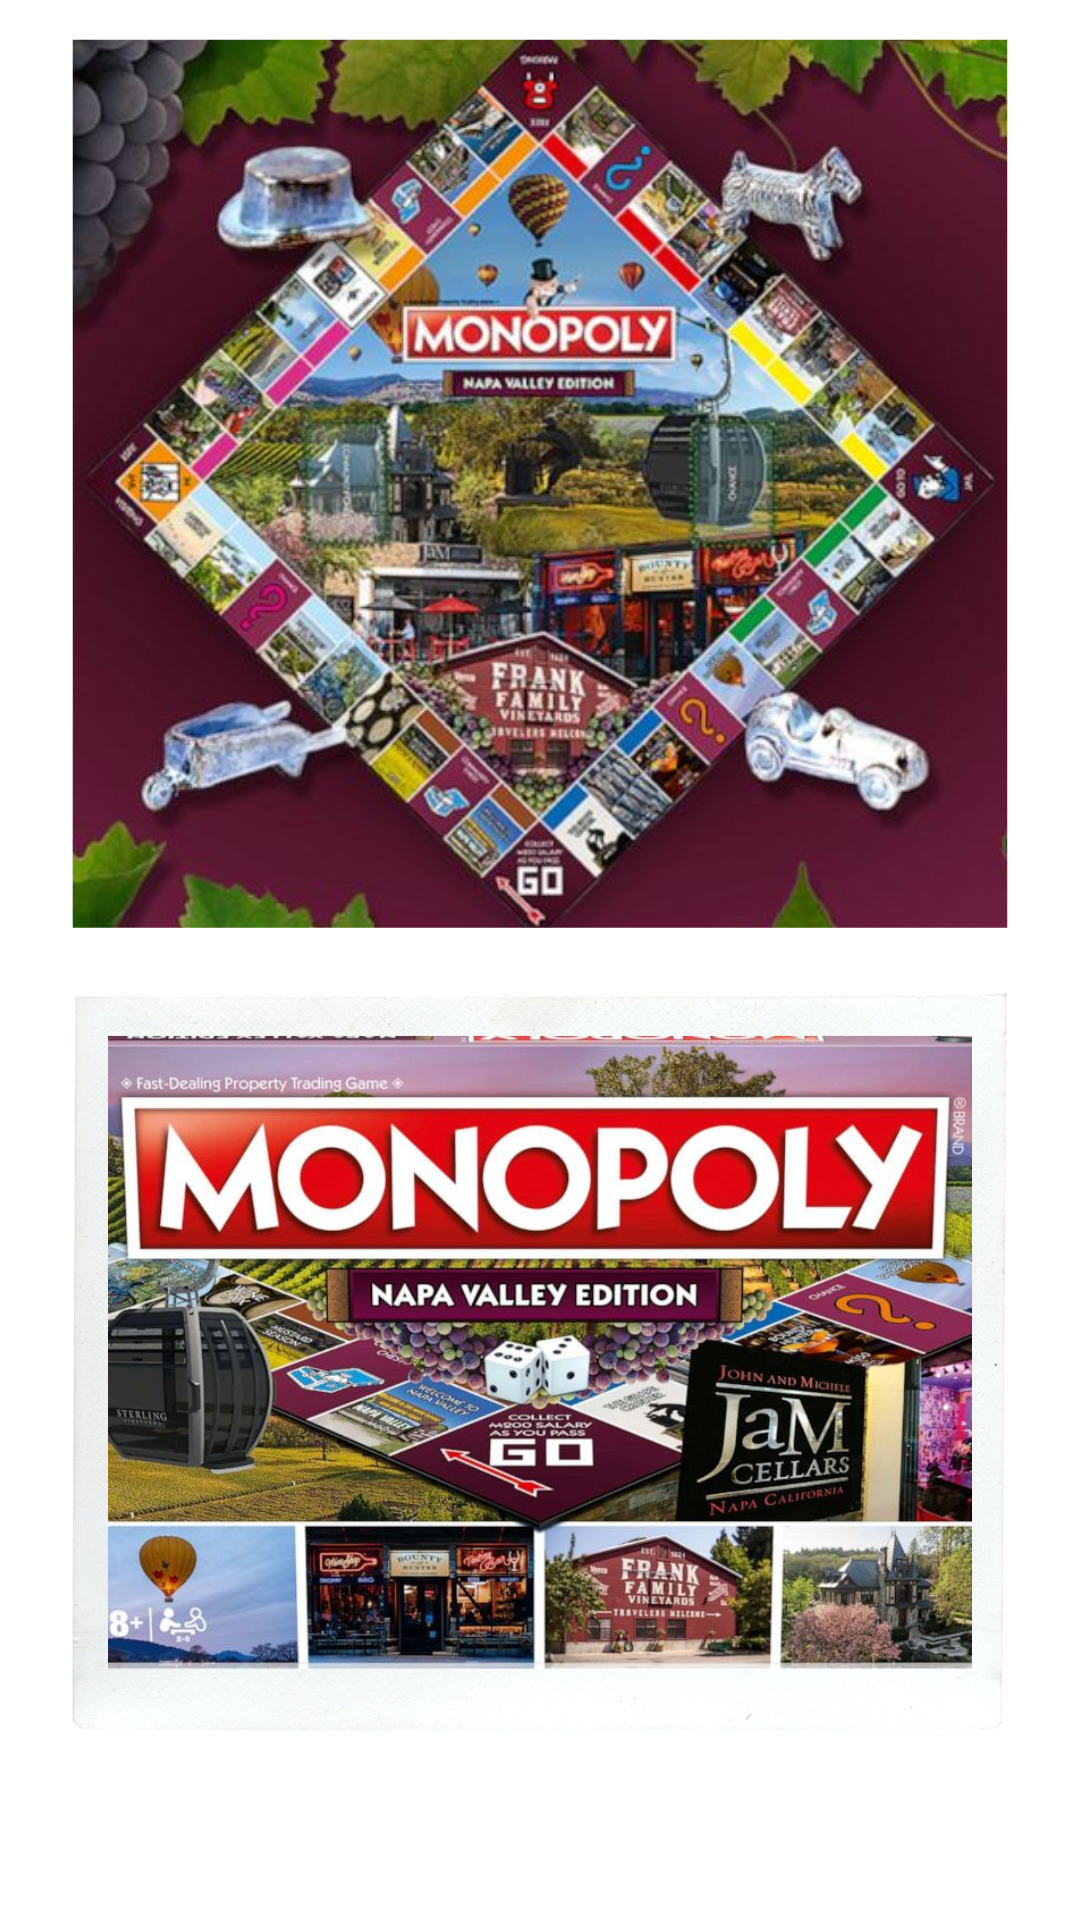 “Monopoly Napa Valley Edition” unveiled this week